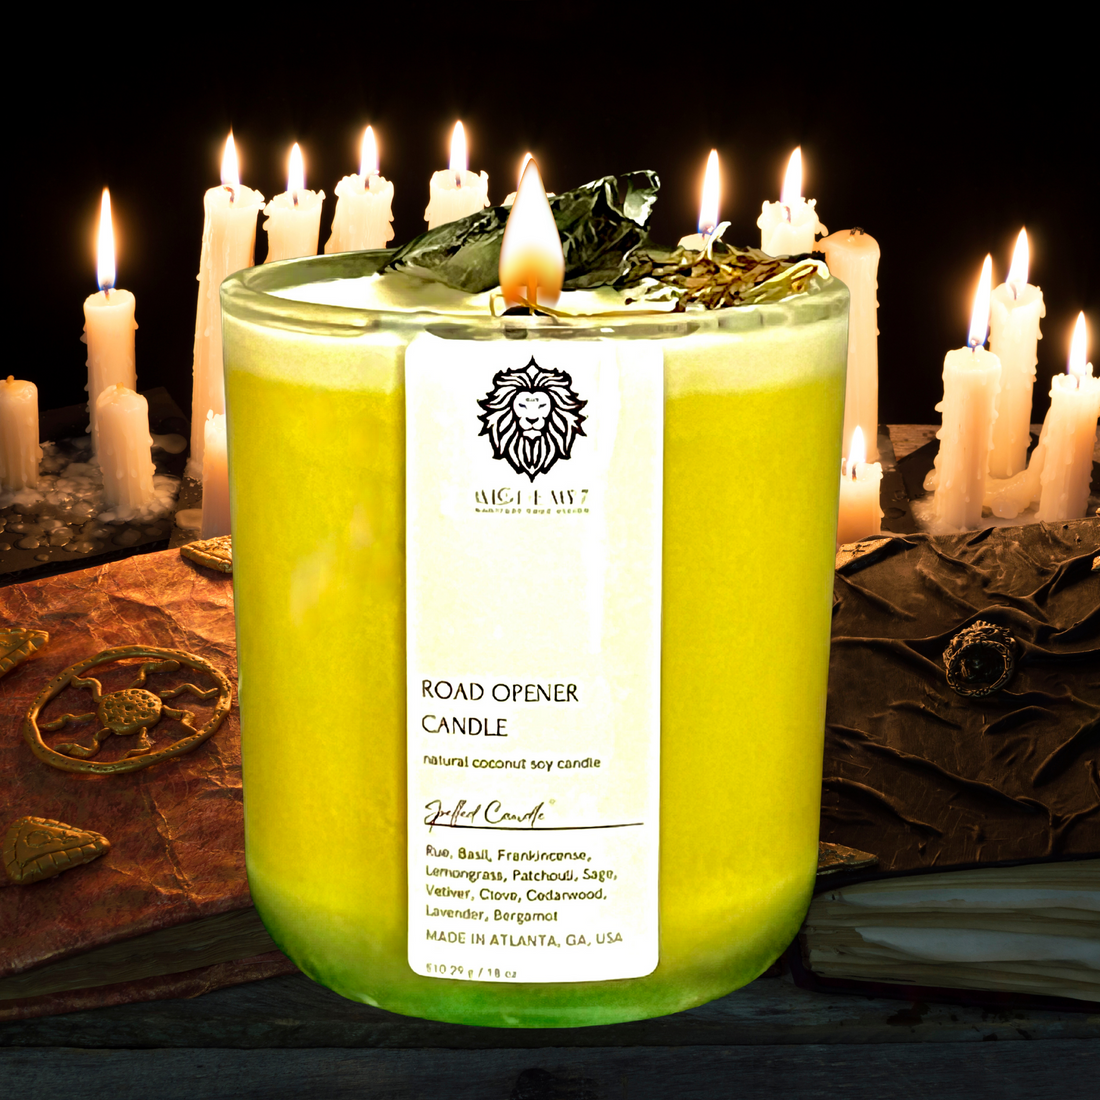 Alchemy7 | Road Opener Spell Candle - Clear the Path to Prosperity - Abre Camino